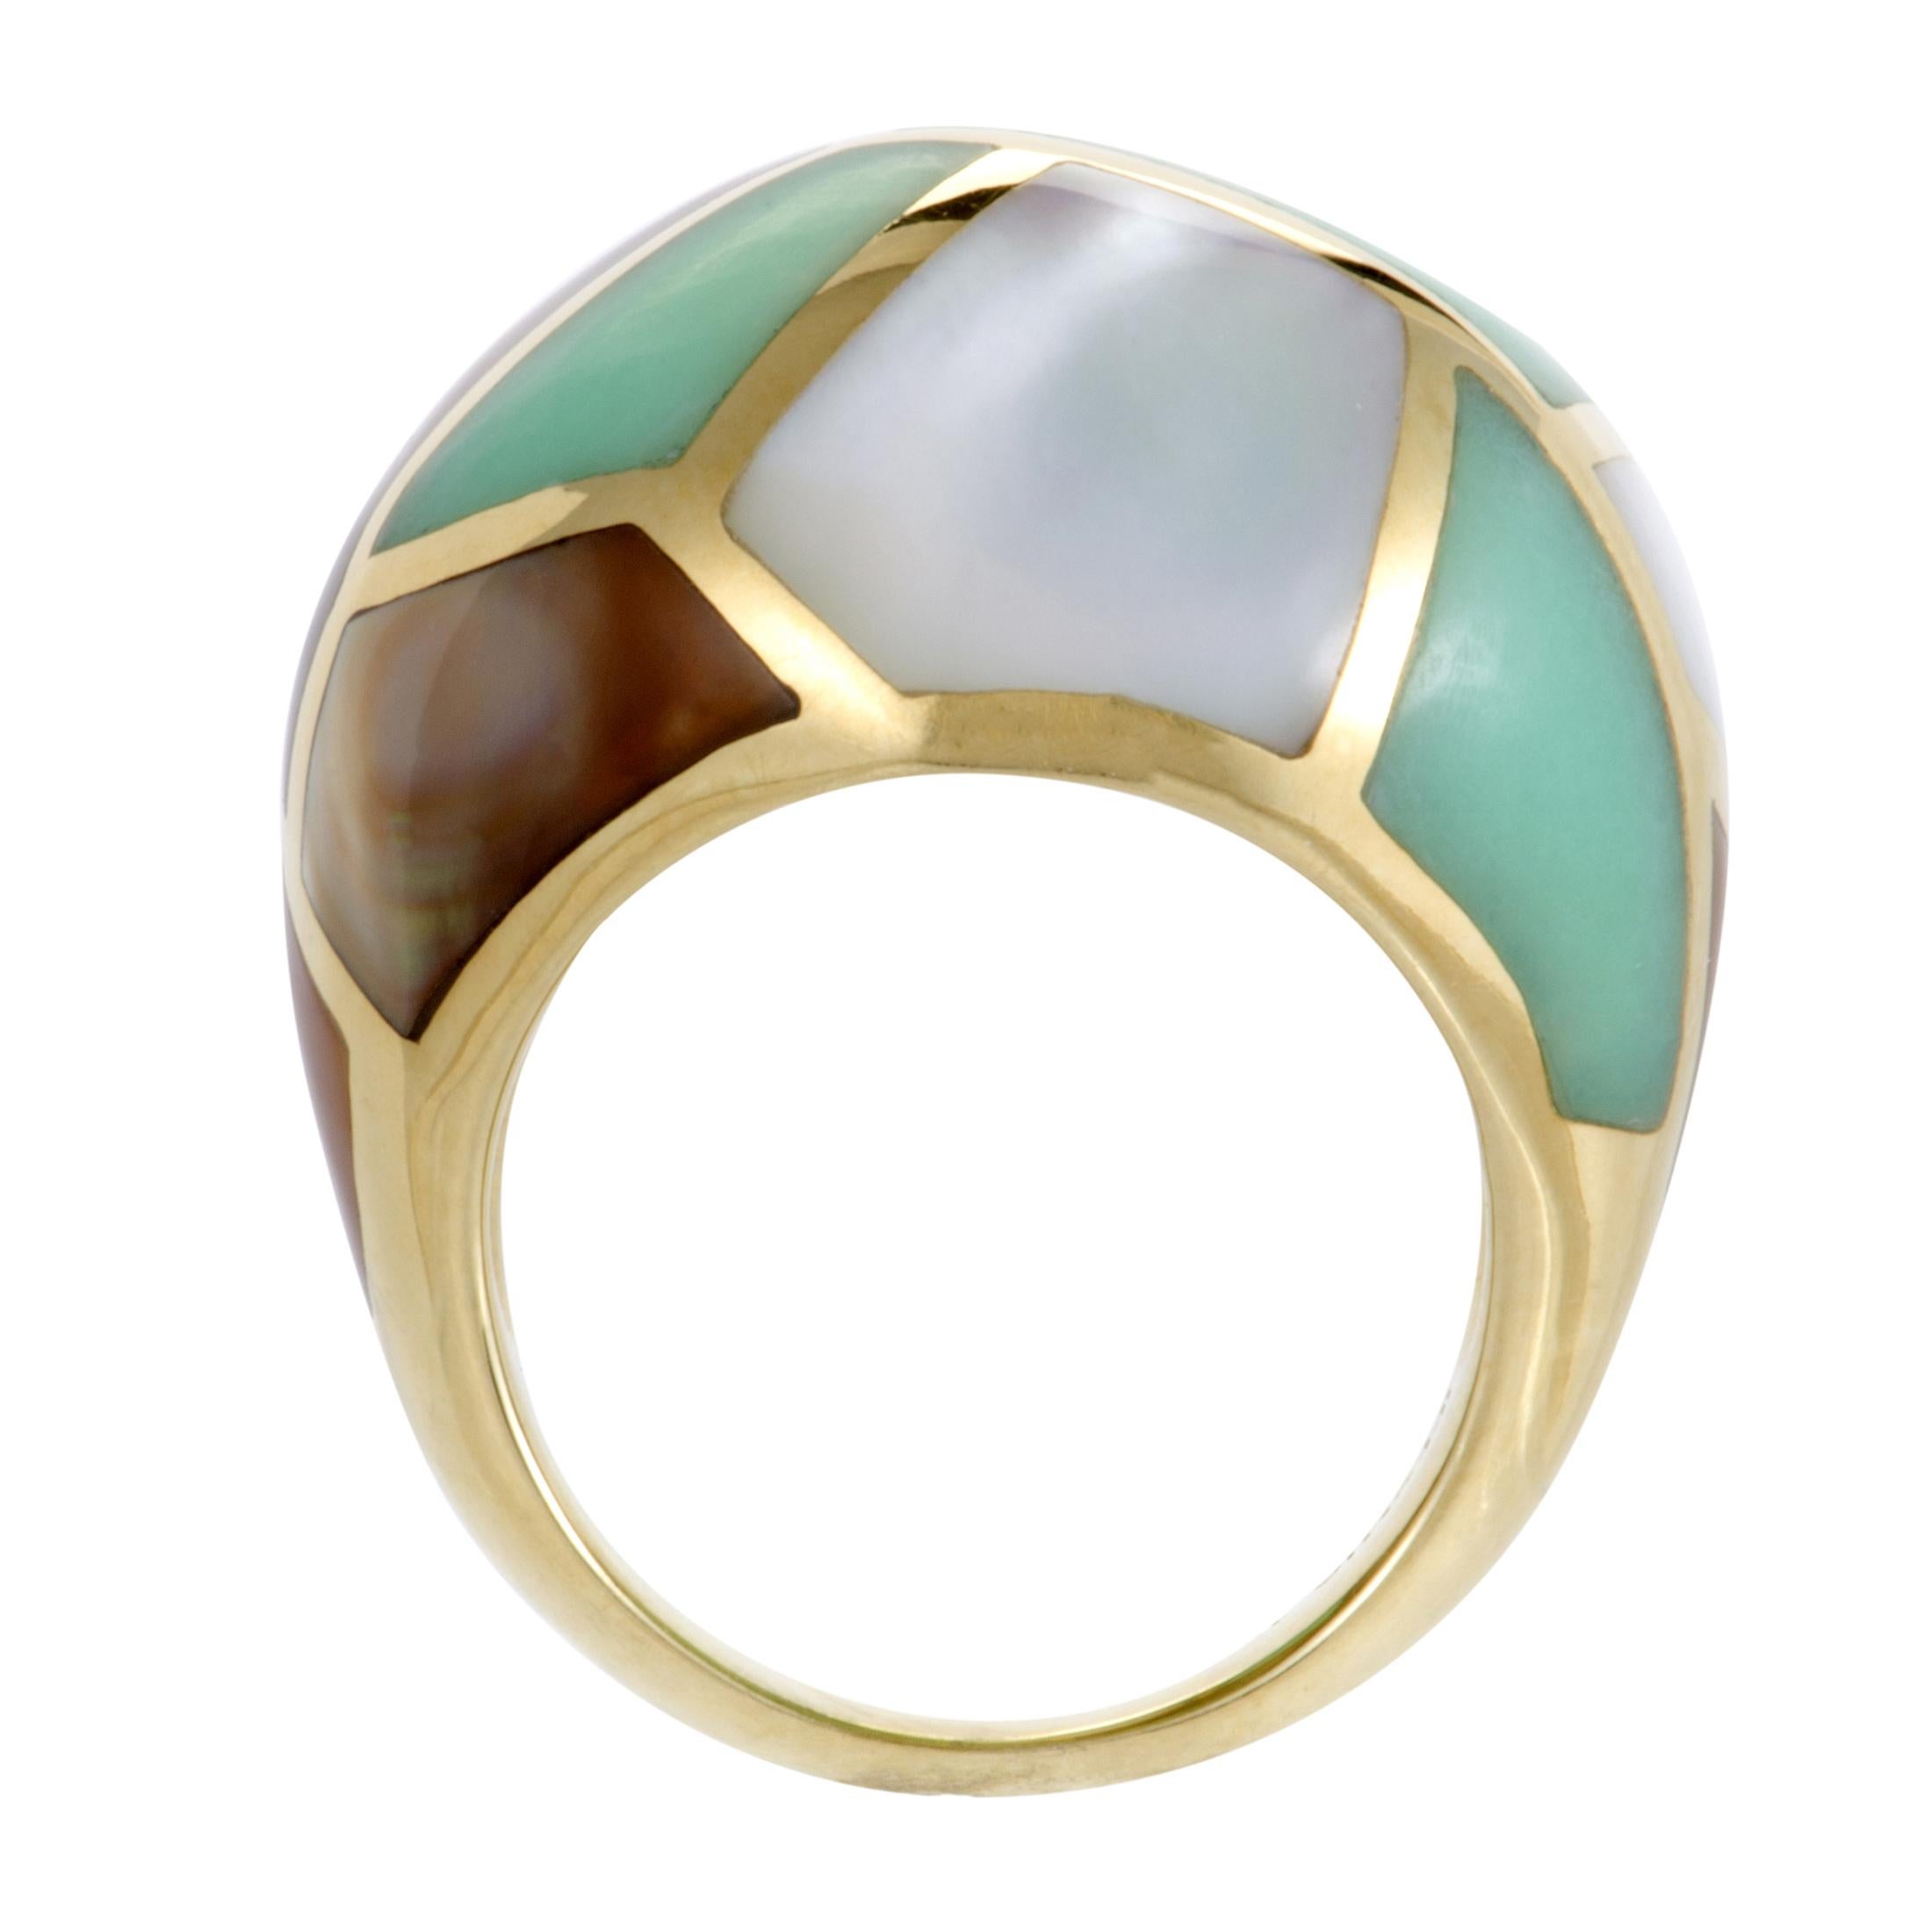 Designed for the ingenious “Rock Candy” collection by Ippolita, this stunning ring is made of attractive 18K yellow gold and boasts sublime mother of pearl and green agate that form a mosaic-like décor.
Ring Size: 7.0
Ring Top Dimensions: 45mm x 30mm